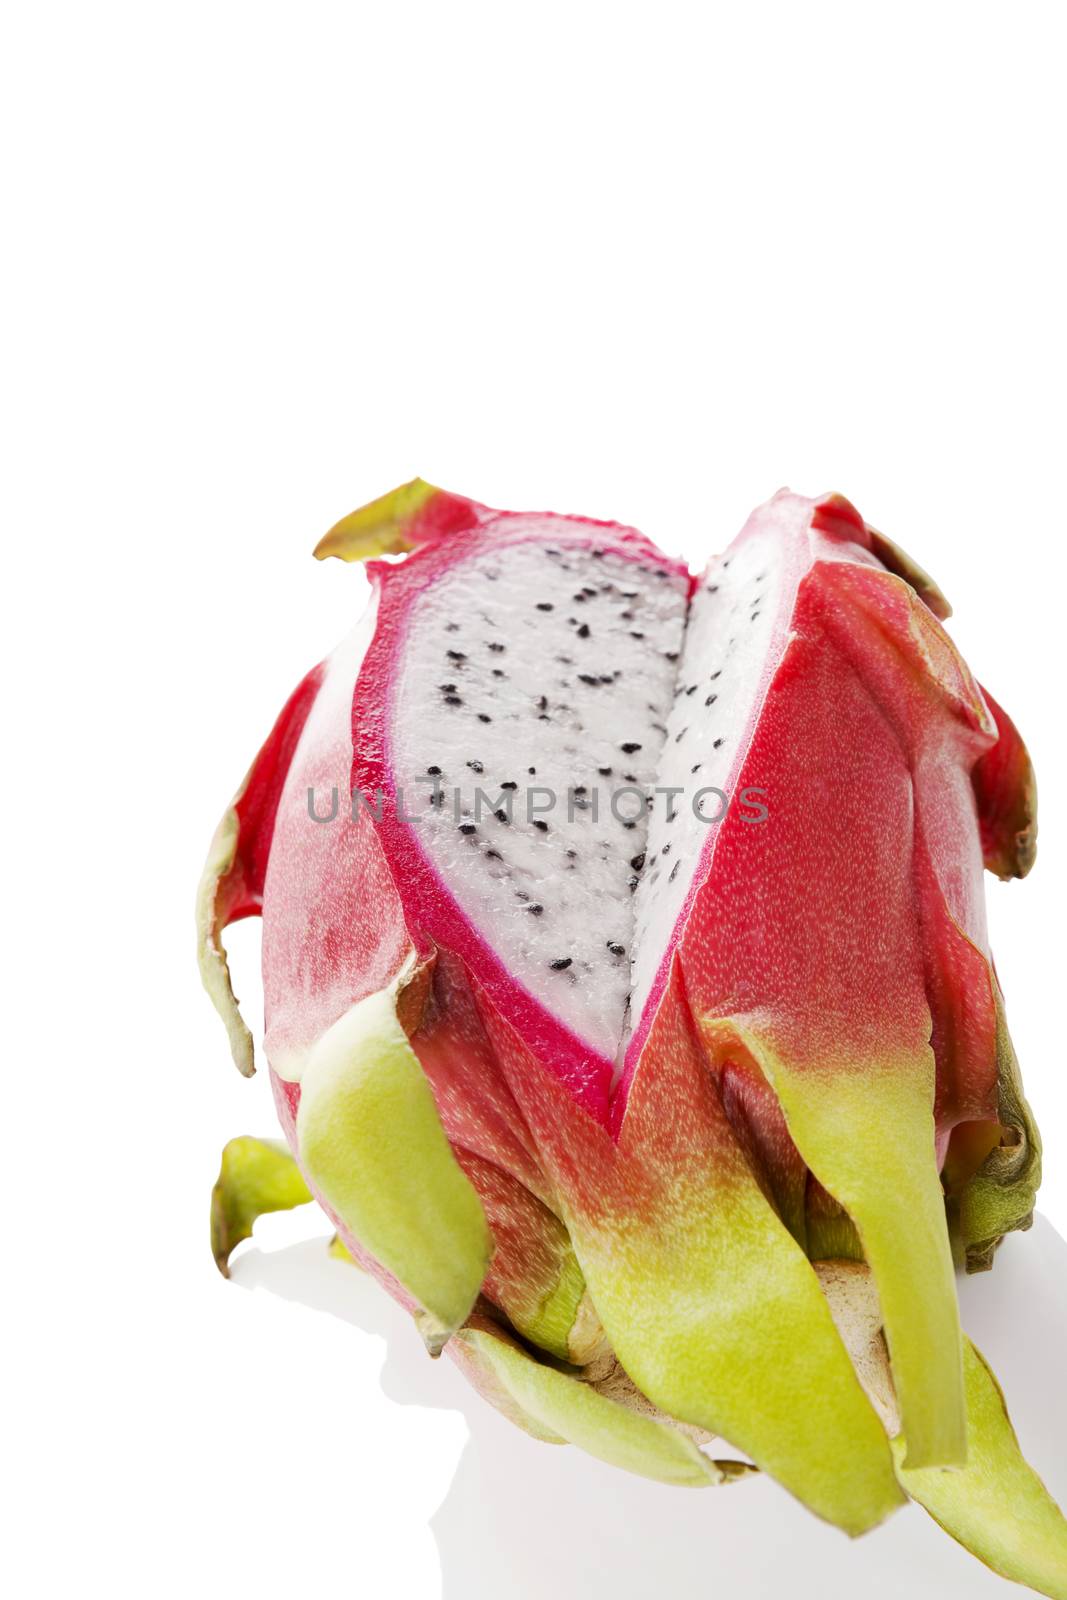 Delicious ripe dragon fruit isolated on white background. Tropical fruit, pitaya concept. Healthy eating.